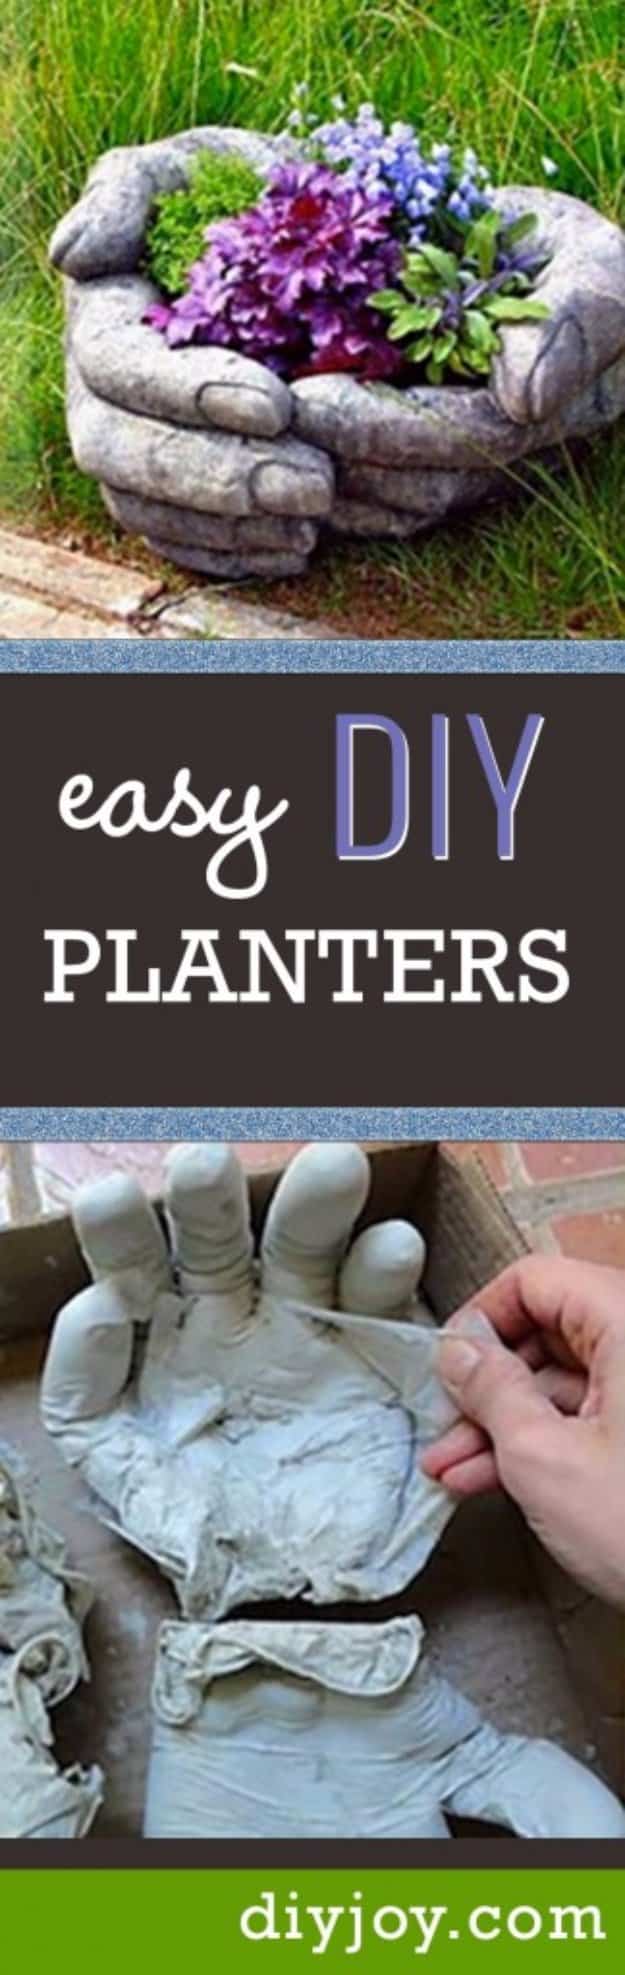 DIY Ideas for Your Garden - DIY Concrete Hand Planters - Cool Projects for Spring and Summer Gardening - Planters, Rocks, Markers and Handmade Decor for Outdoor Gardens